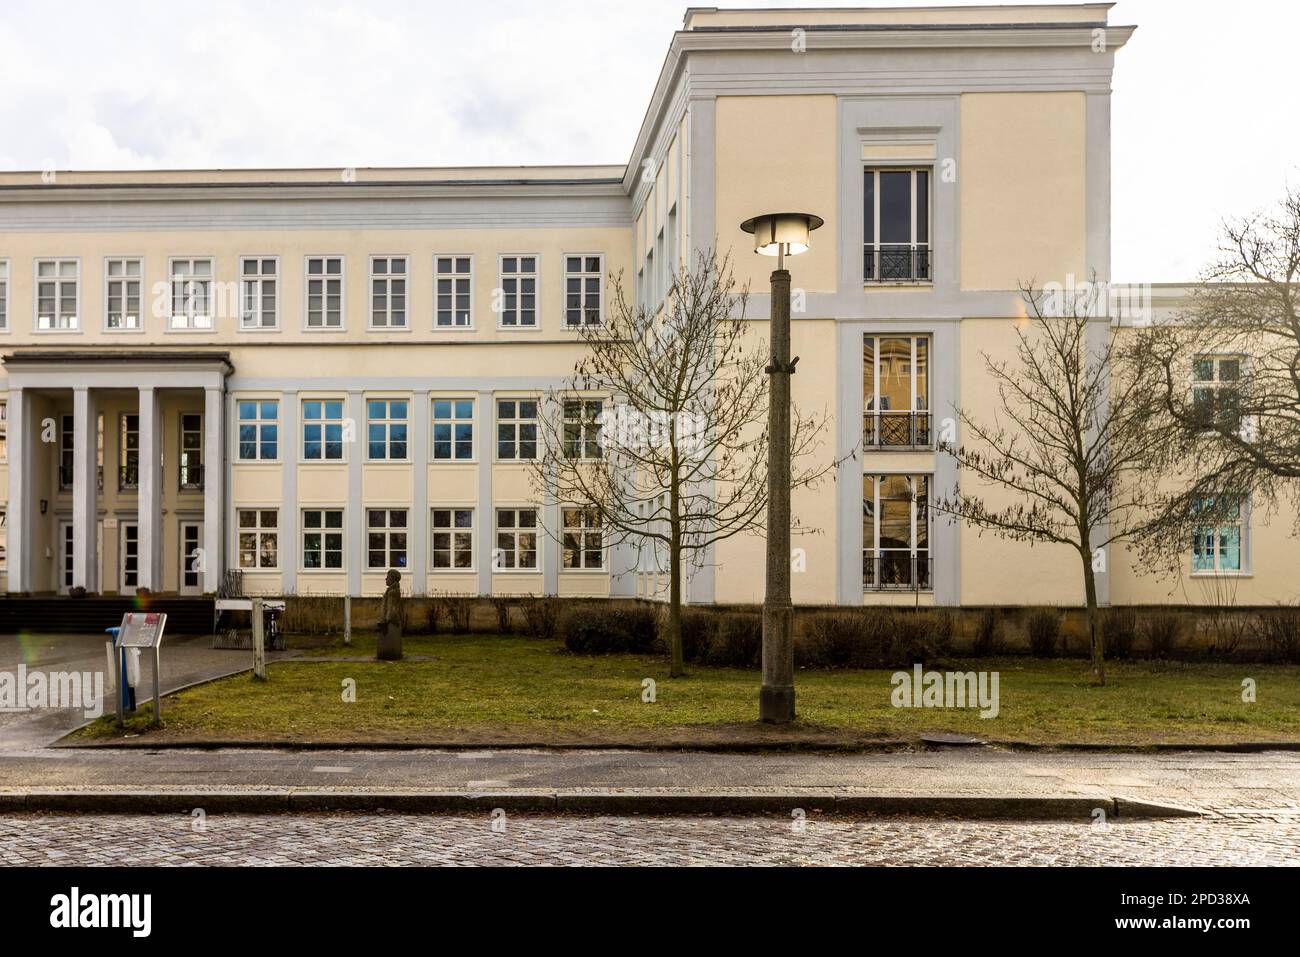 Detail of the Erich-Weinart elementary school on Friedrich-Engels-Strasse in residential complex II, Eisenhüttenstadt. Architectural style reminiscent of Berlin's Stalinallee with its neoclassical buildings in Eisenhüttenstadt, Germany Stock Photo